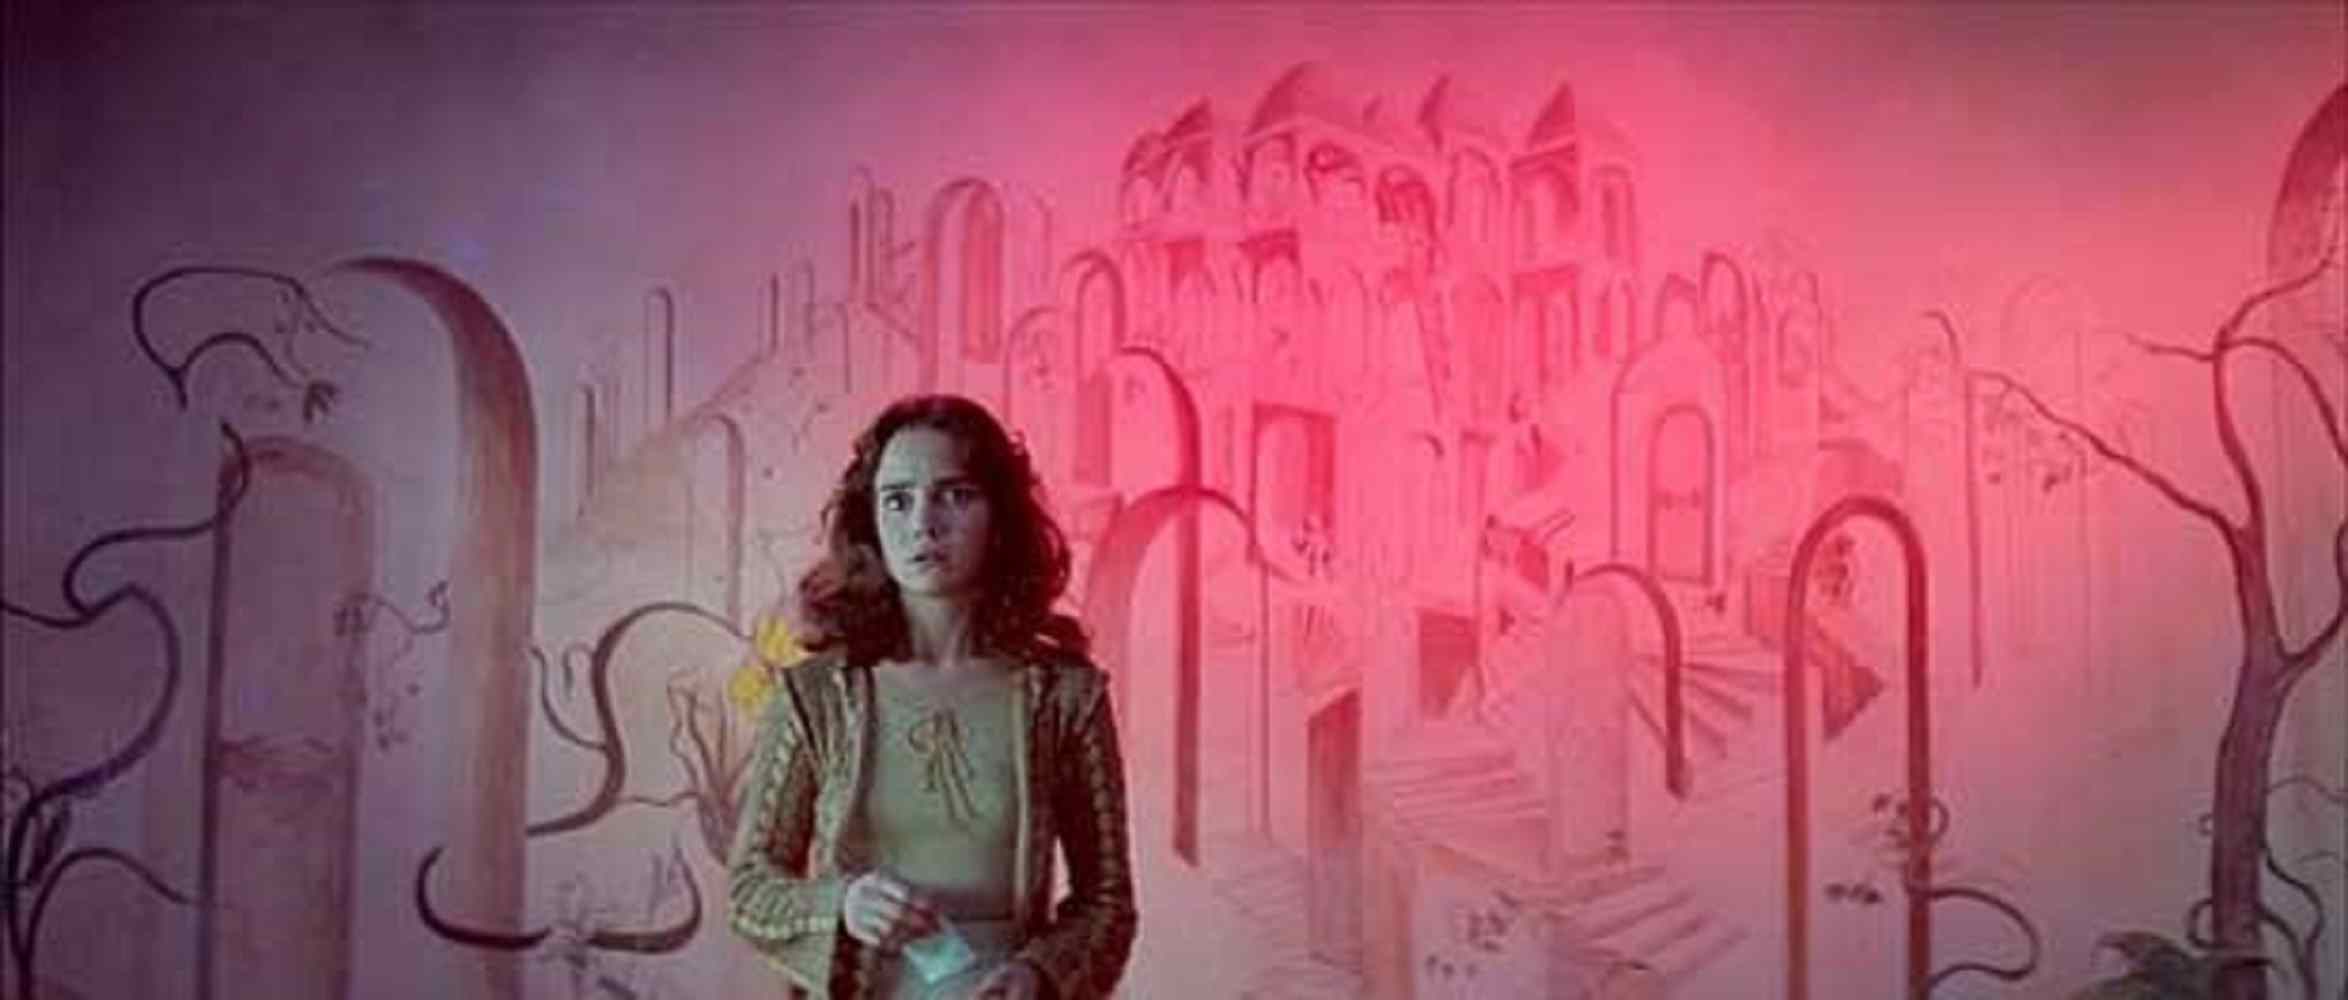 Jessica Harper playing Suzy, outside the witches lair in Dario Argento's Suspiria.